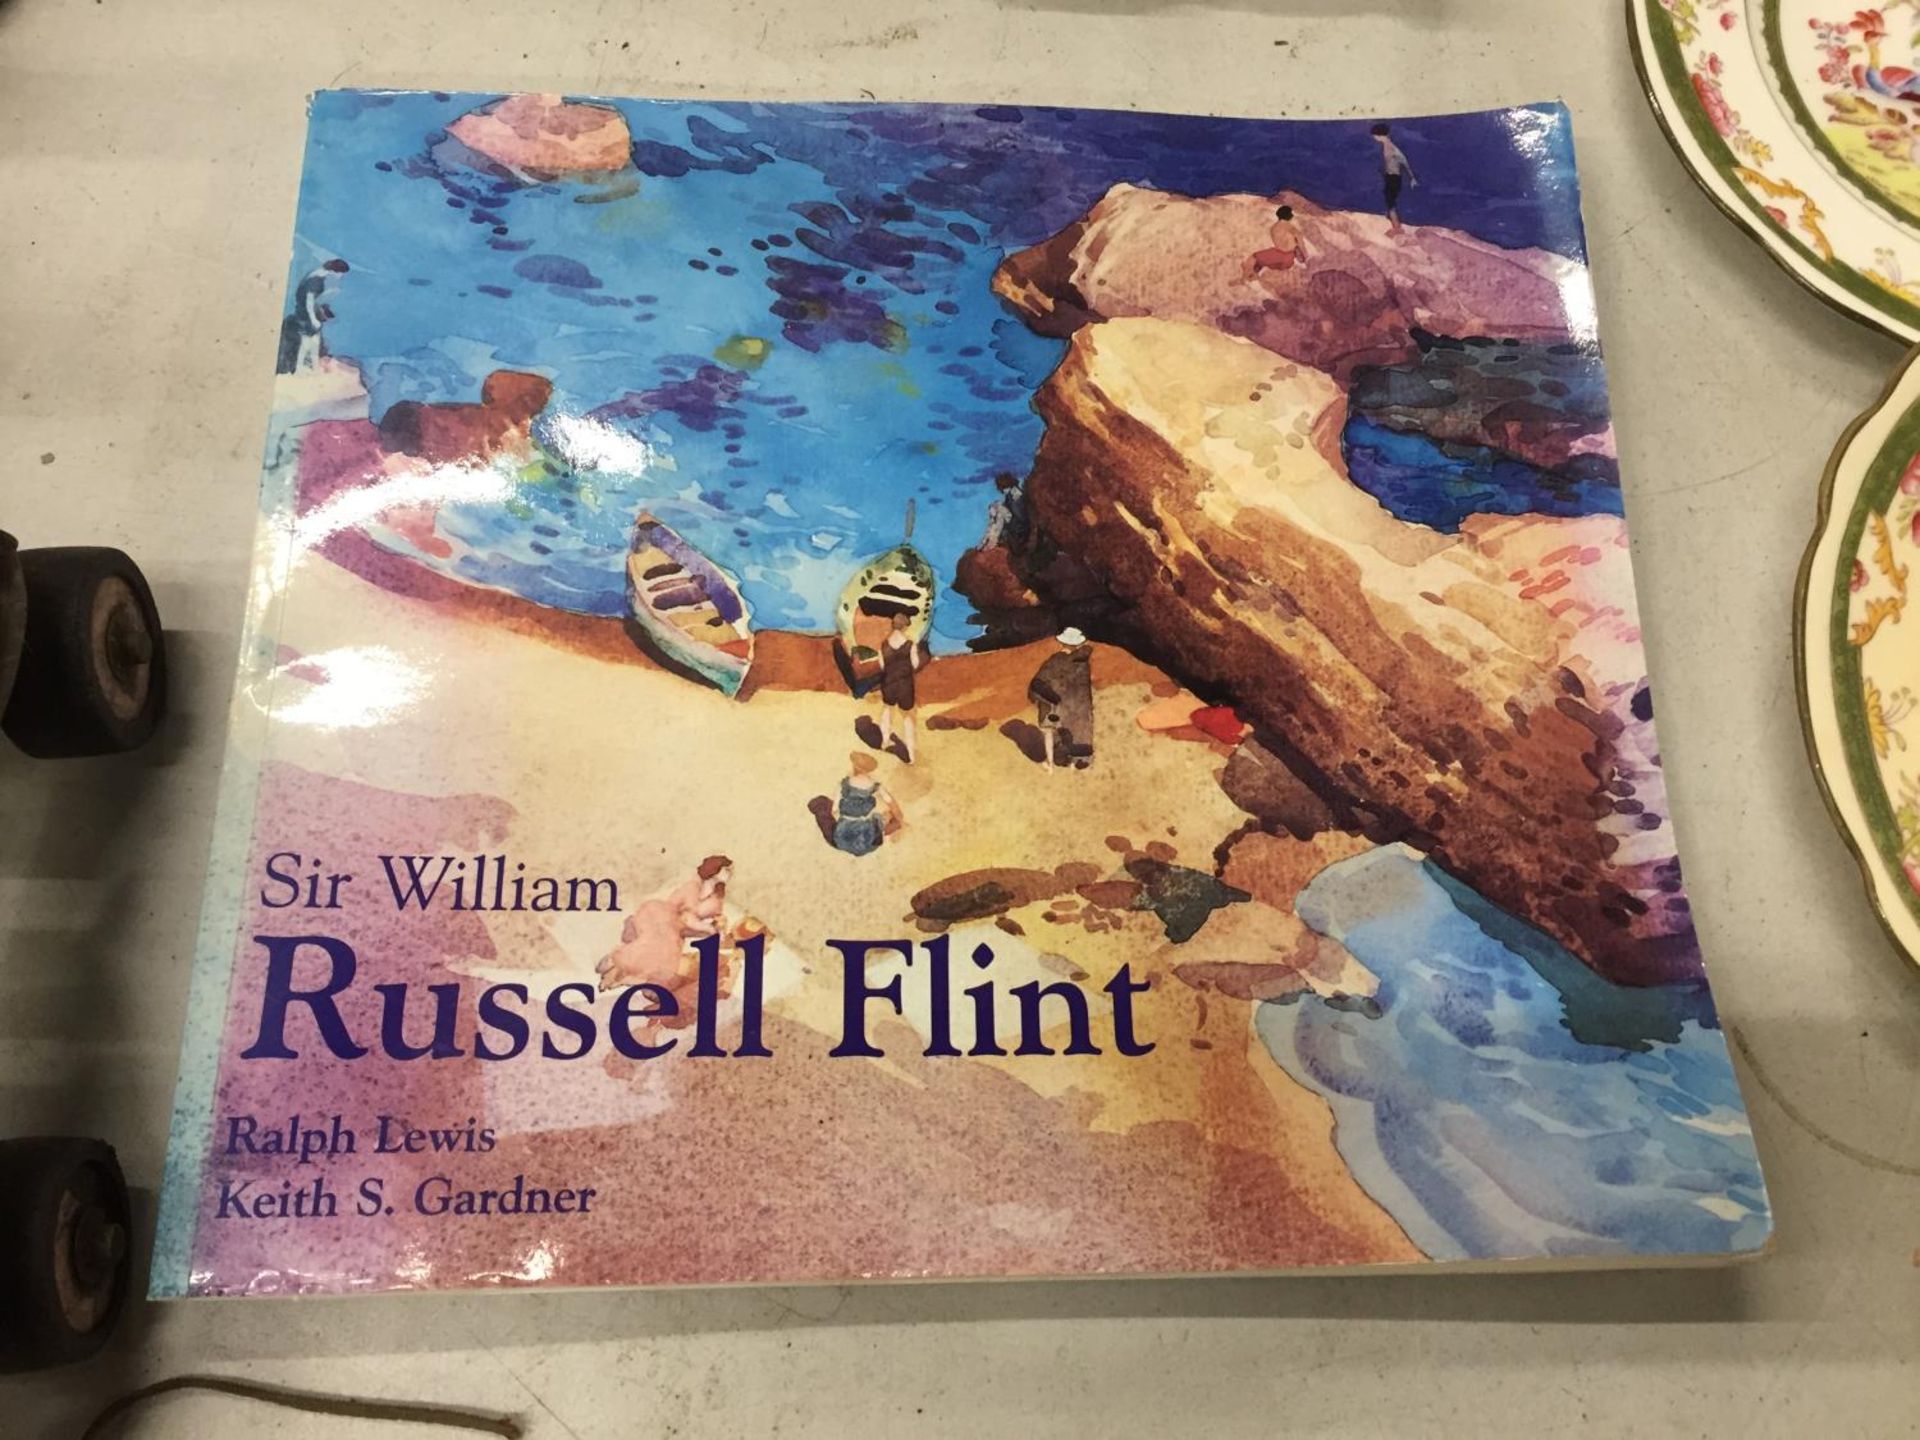 A BOOK ON THE LIFE AND ART OF SIR WILLIAM RUSSELL FLINT